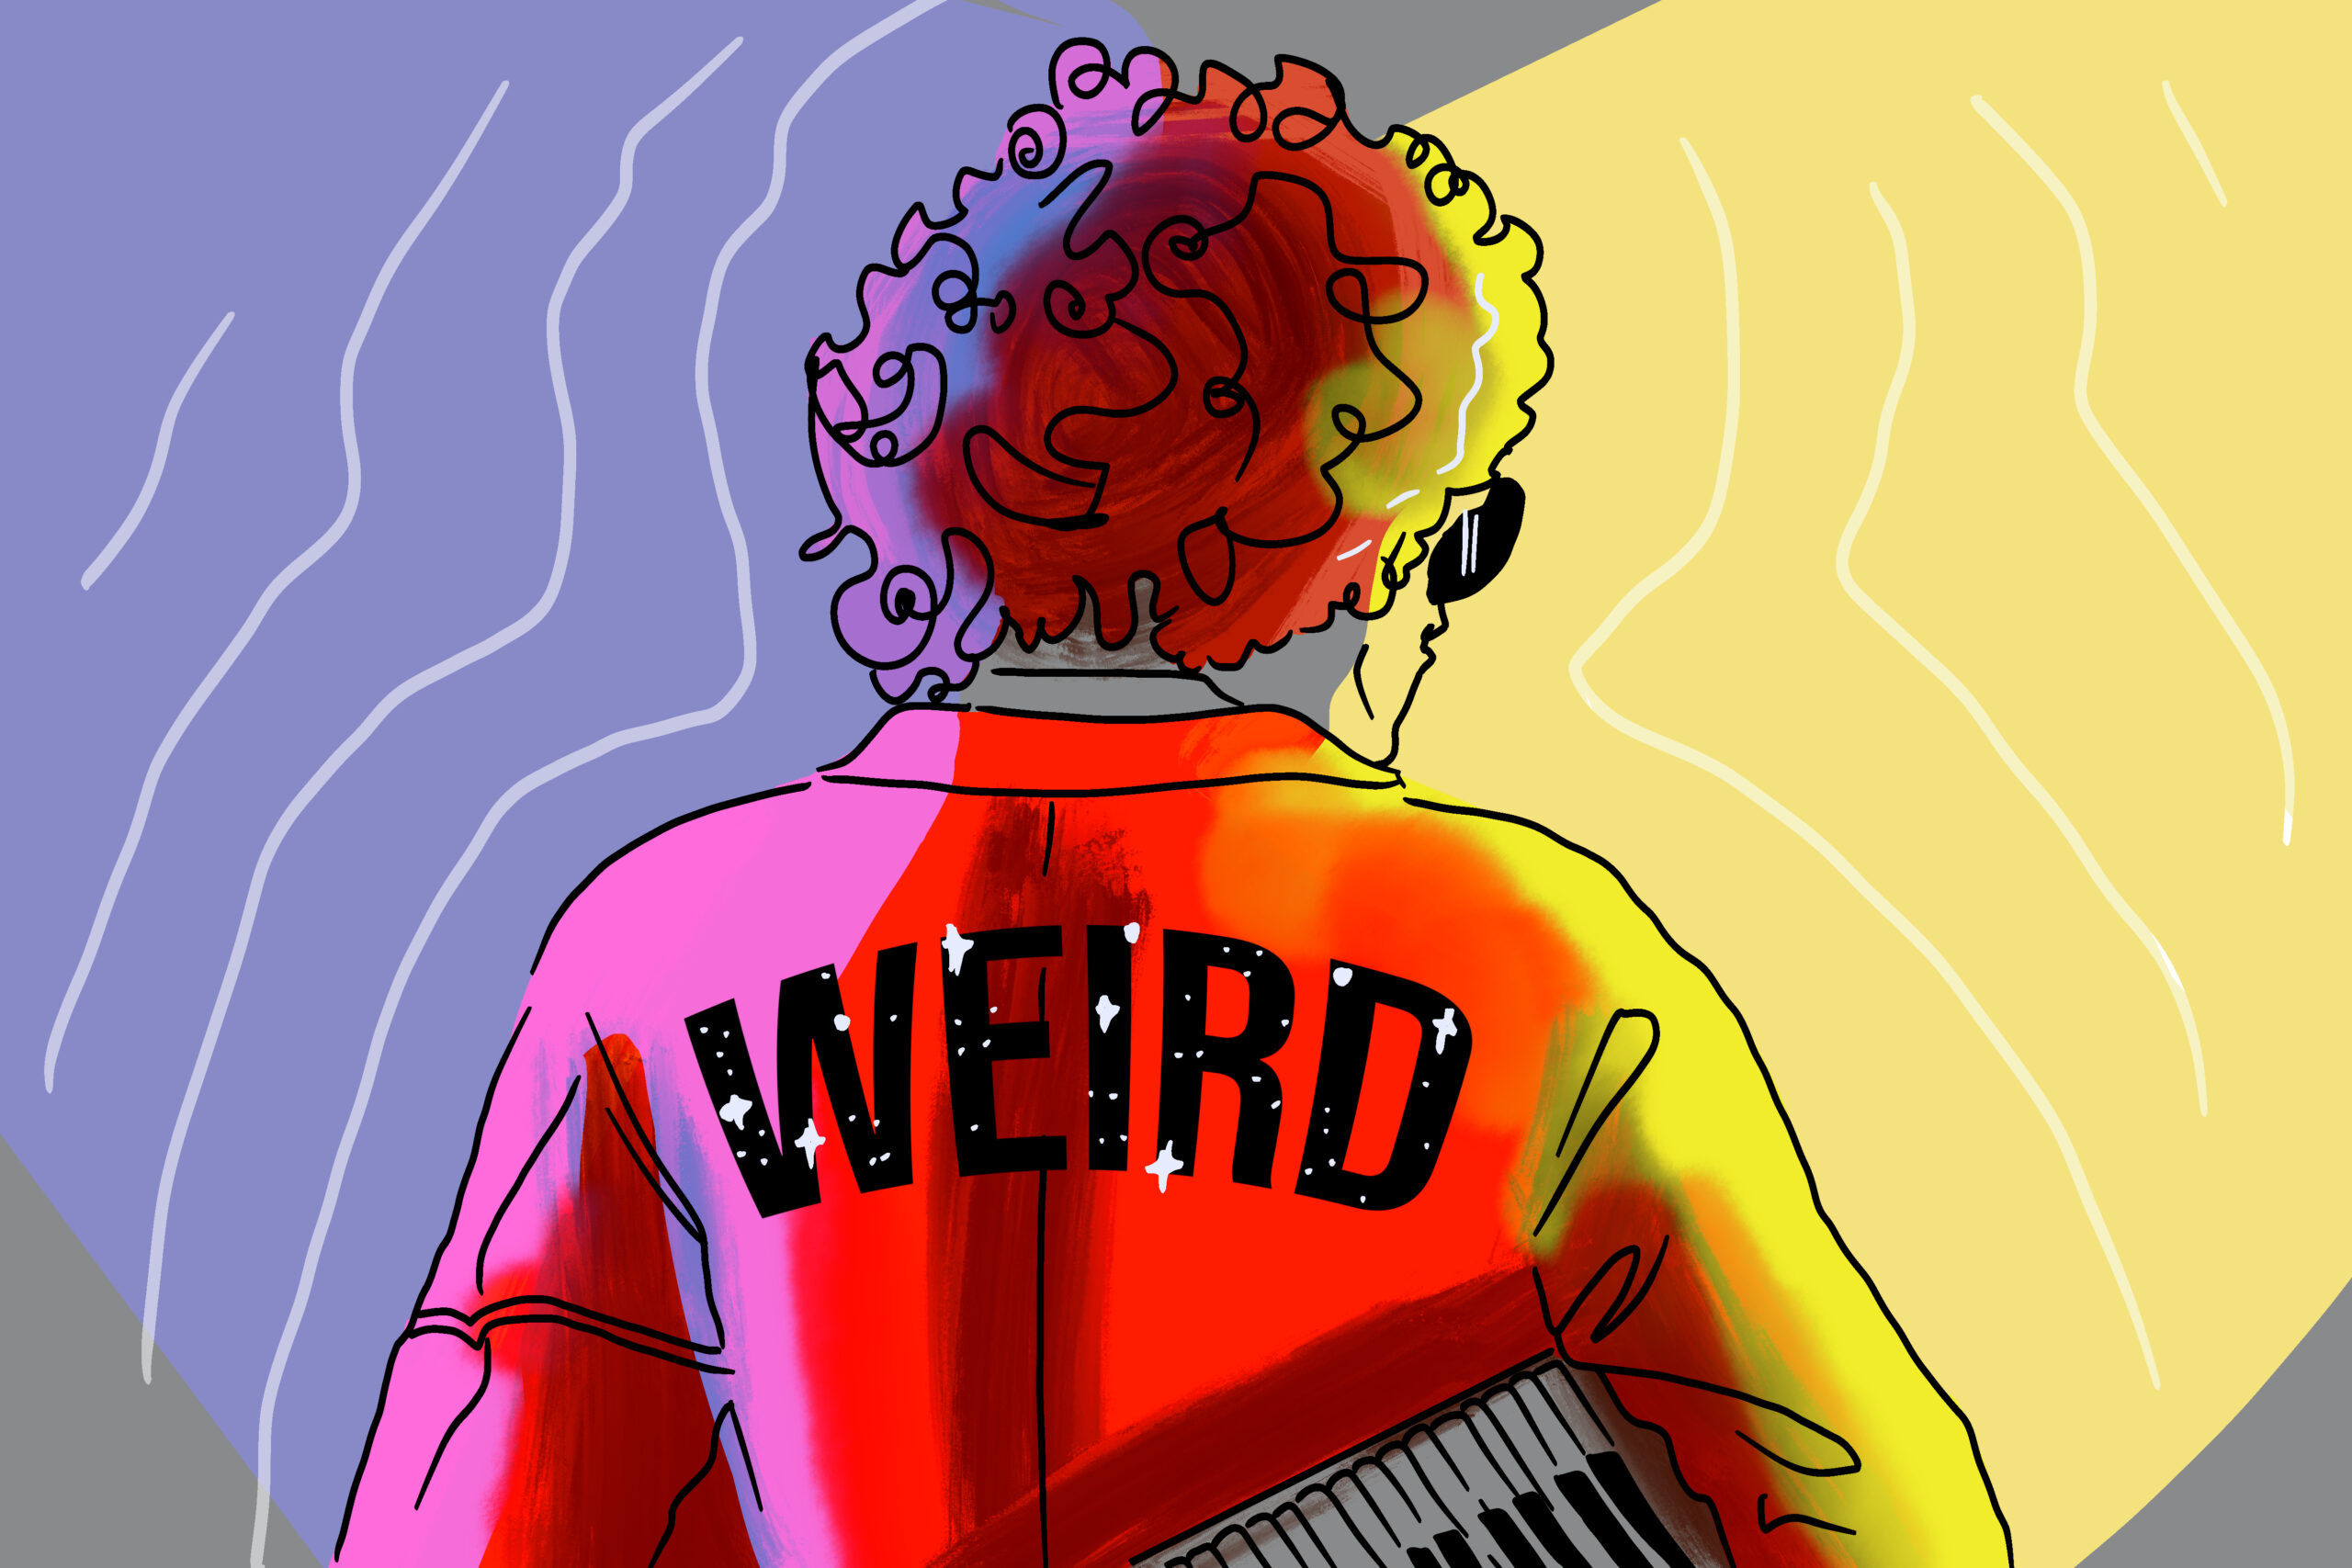 A Review of ‘Weird: The Al Yankovic Story’ a Love Letter To His Career, Comedy, and Making of a Legacy